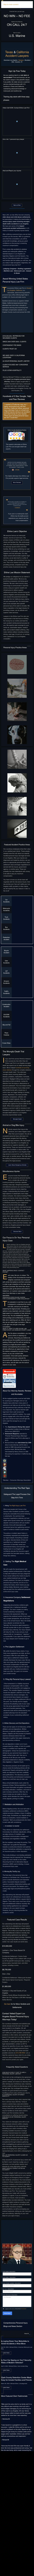 Ehline Law Firm Personal Injury Attorneys, APLC - Glendale CA Lawyers